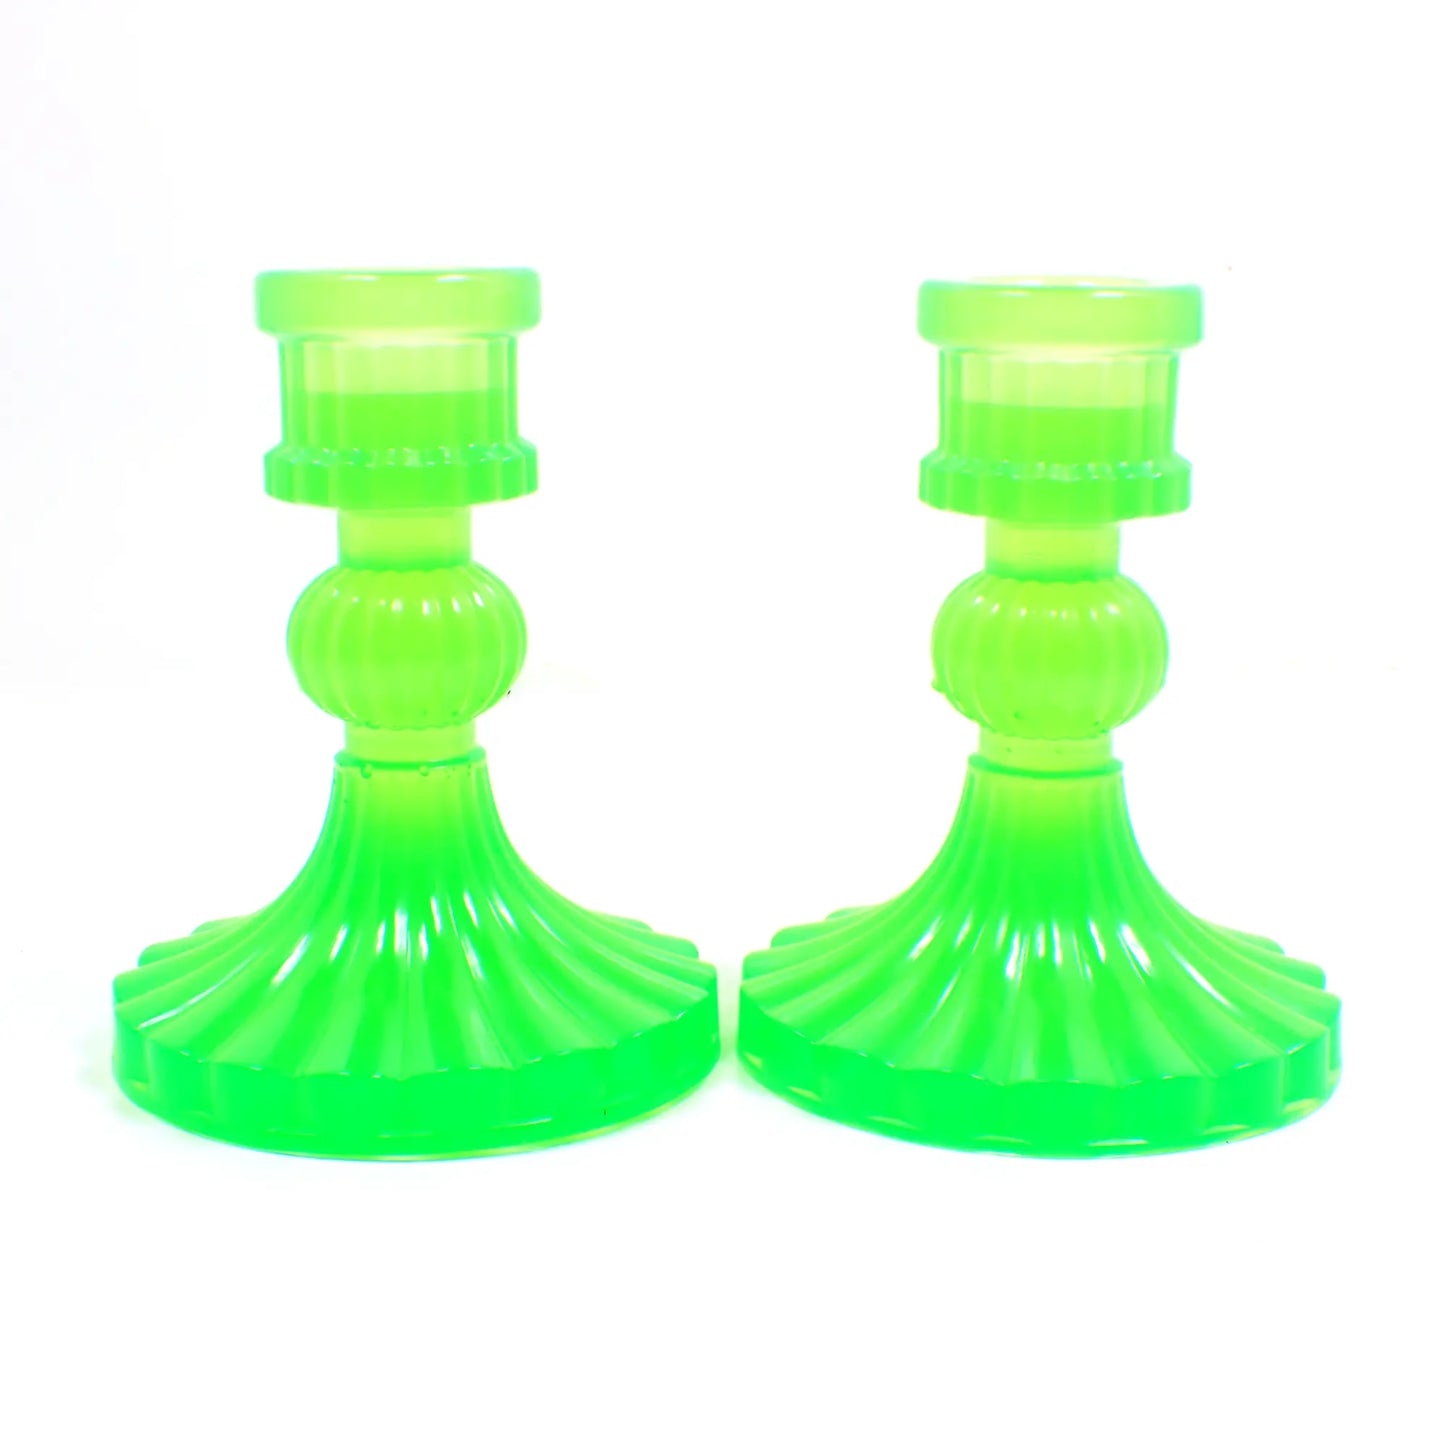 Set of Two Vintage Style Handmade Semi Translucent Neon Green Resin Candlestick Holders